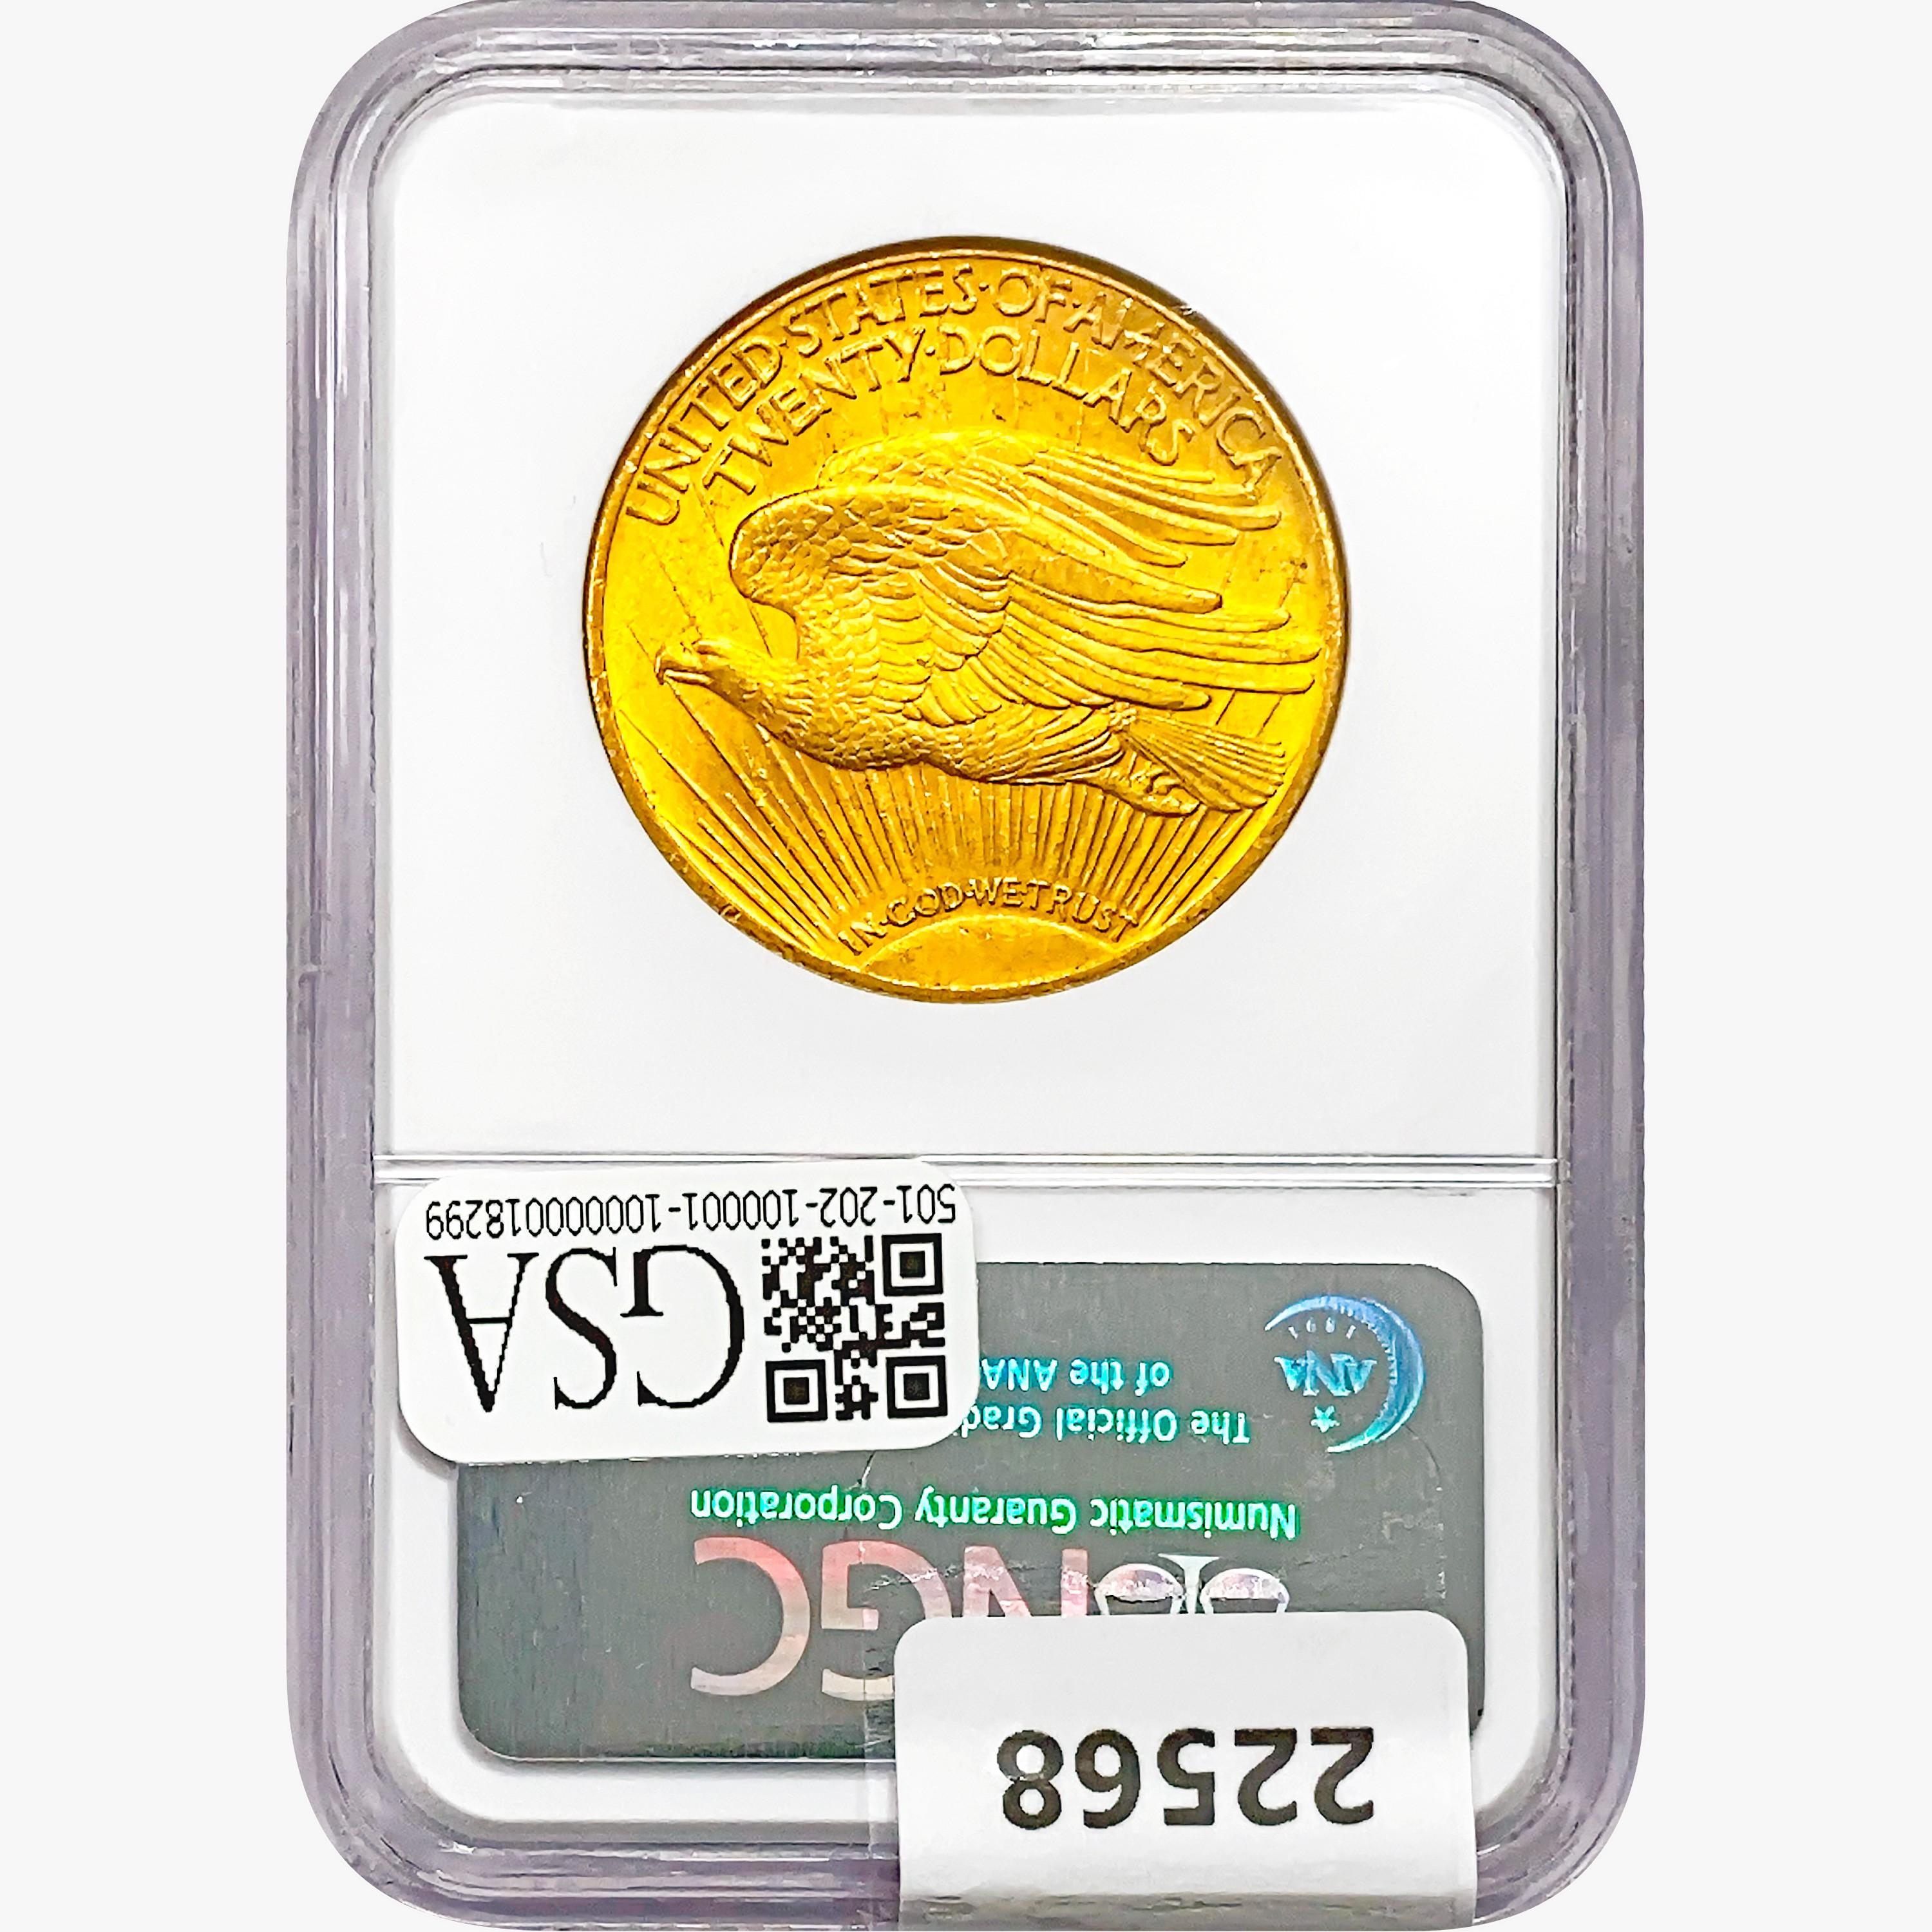 1924 $20 Gold Double Eagle NGC MS62